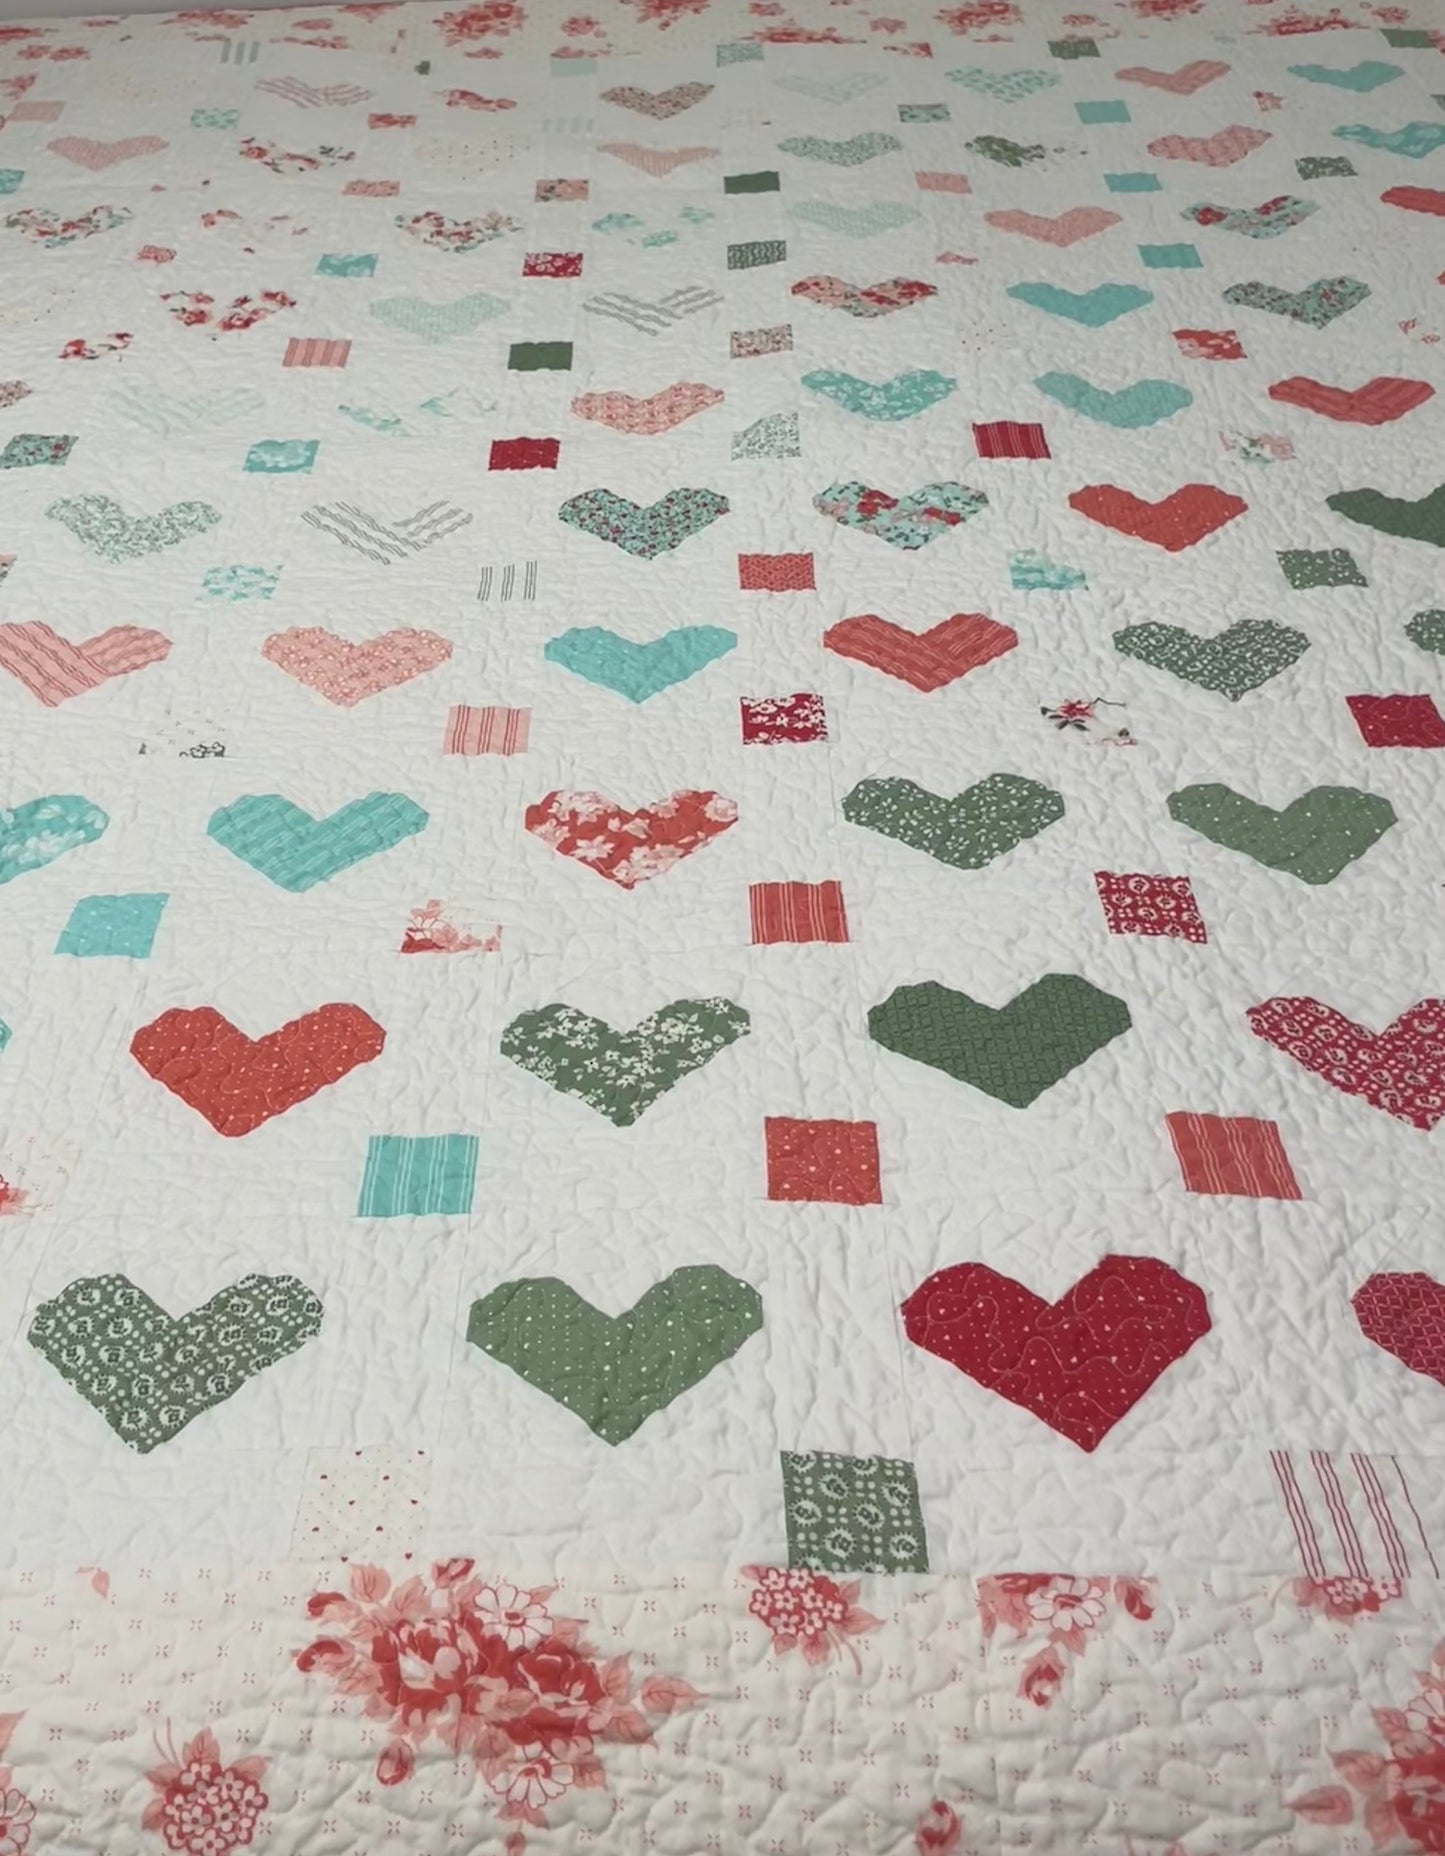 Valentine's Quilt - Whole Hearted